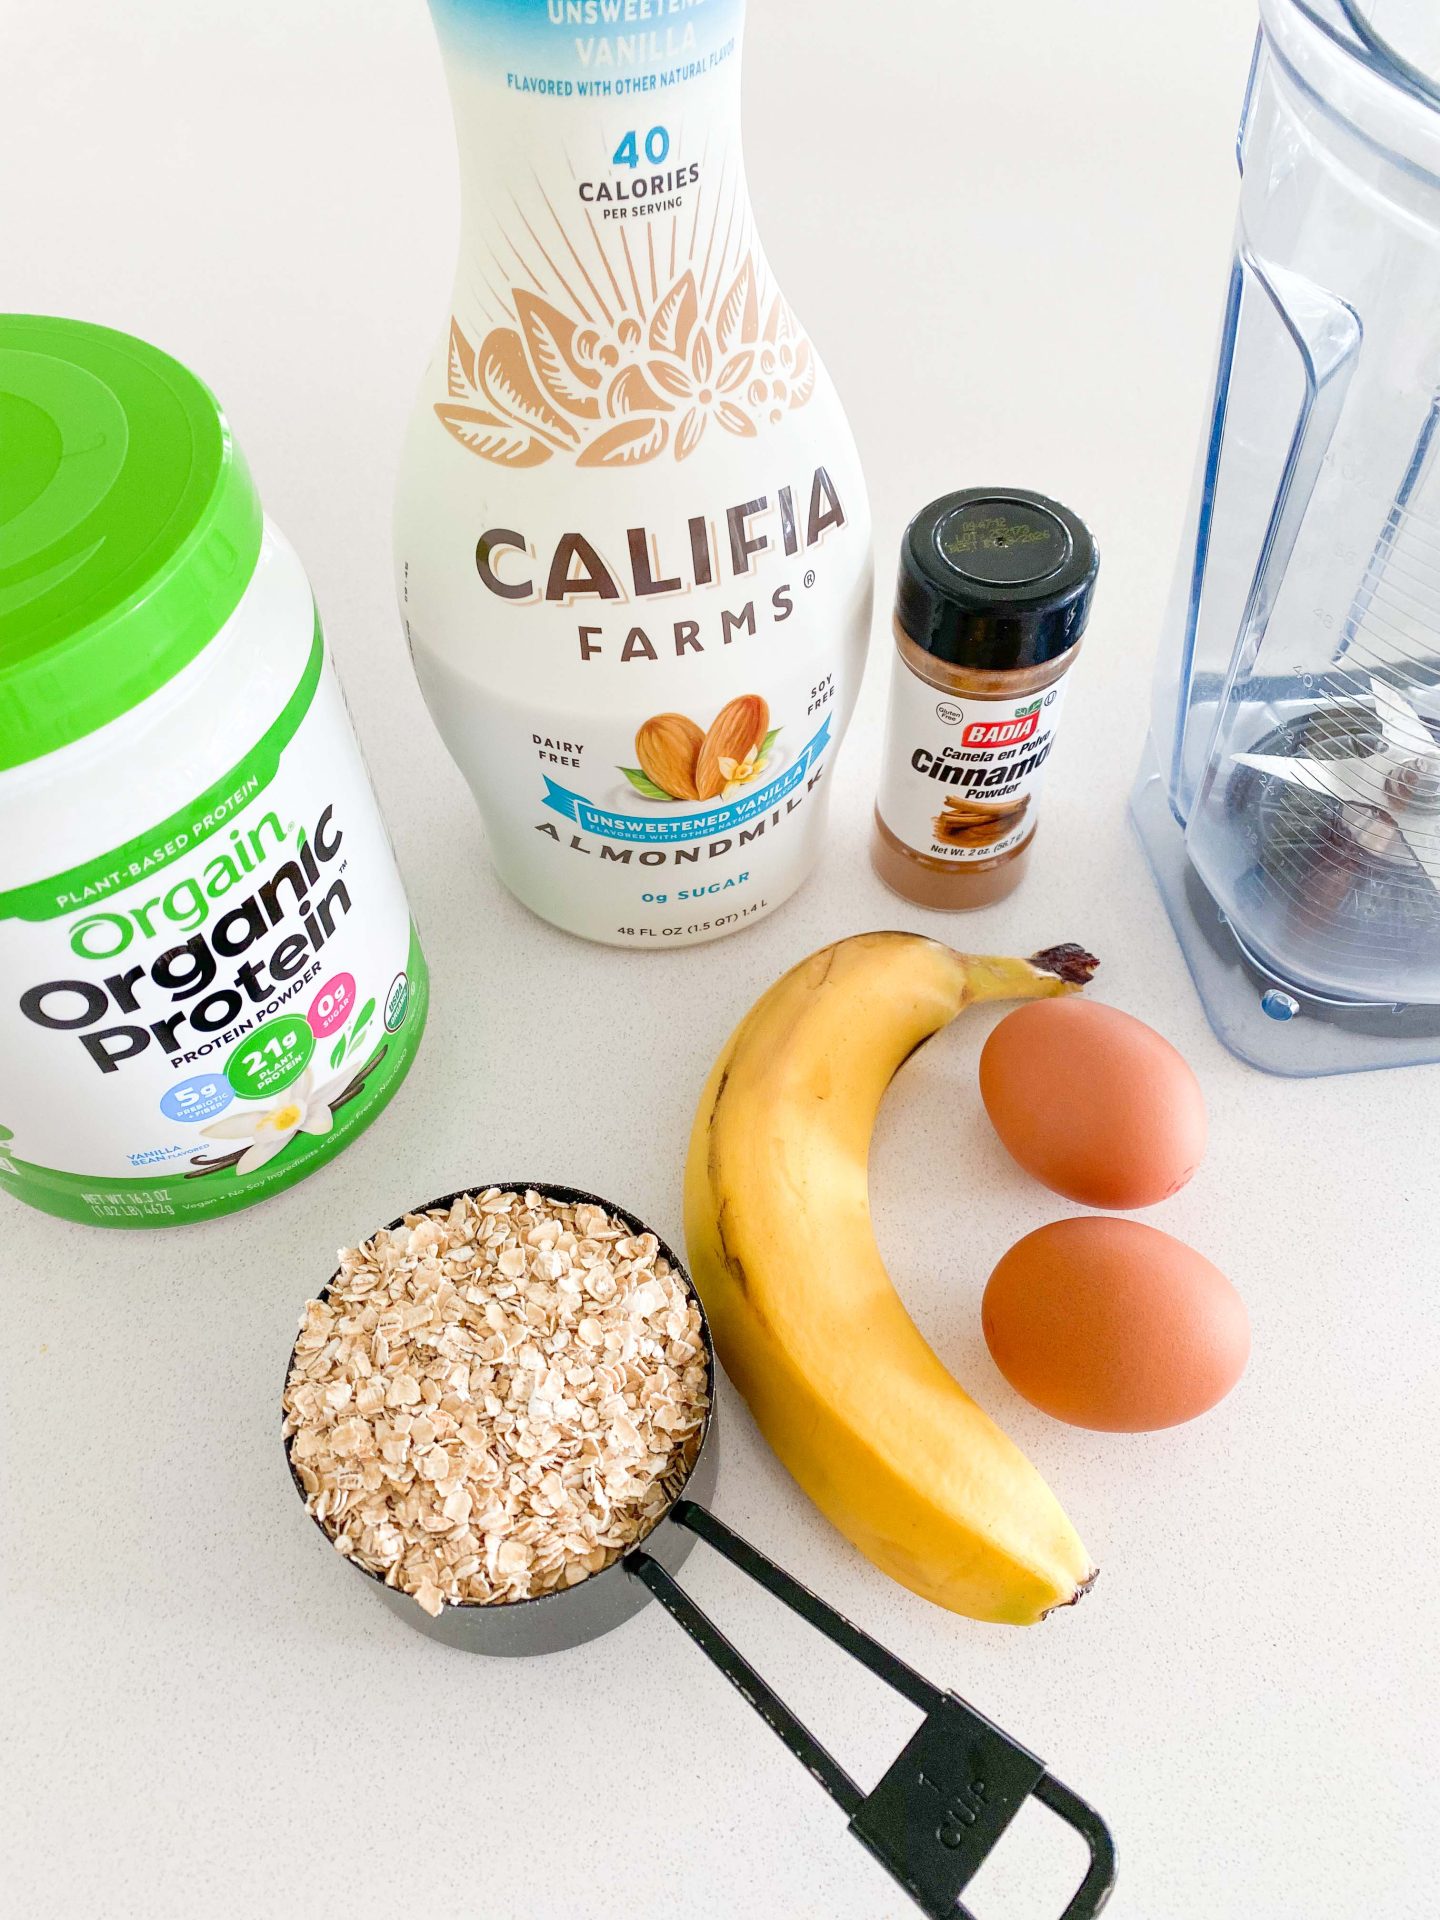 oatmeal pancakes, healthy pancakes, healthy breakfast, what to have for breakfast, gluten free, dairy free, protein packed, blueberry, banana, plant based protein powder, almond milk, kid-friendly, good food, meal prep, how to make protein oat pancakes, macros